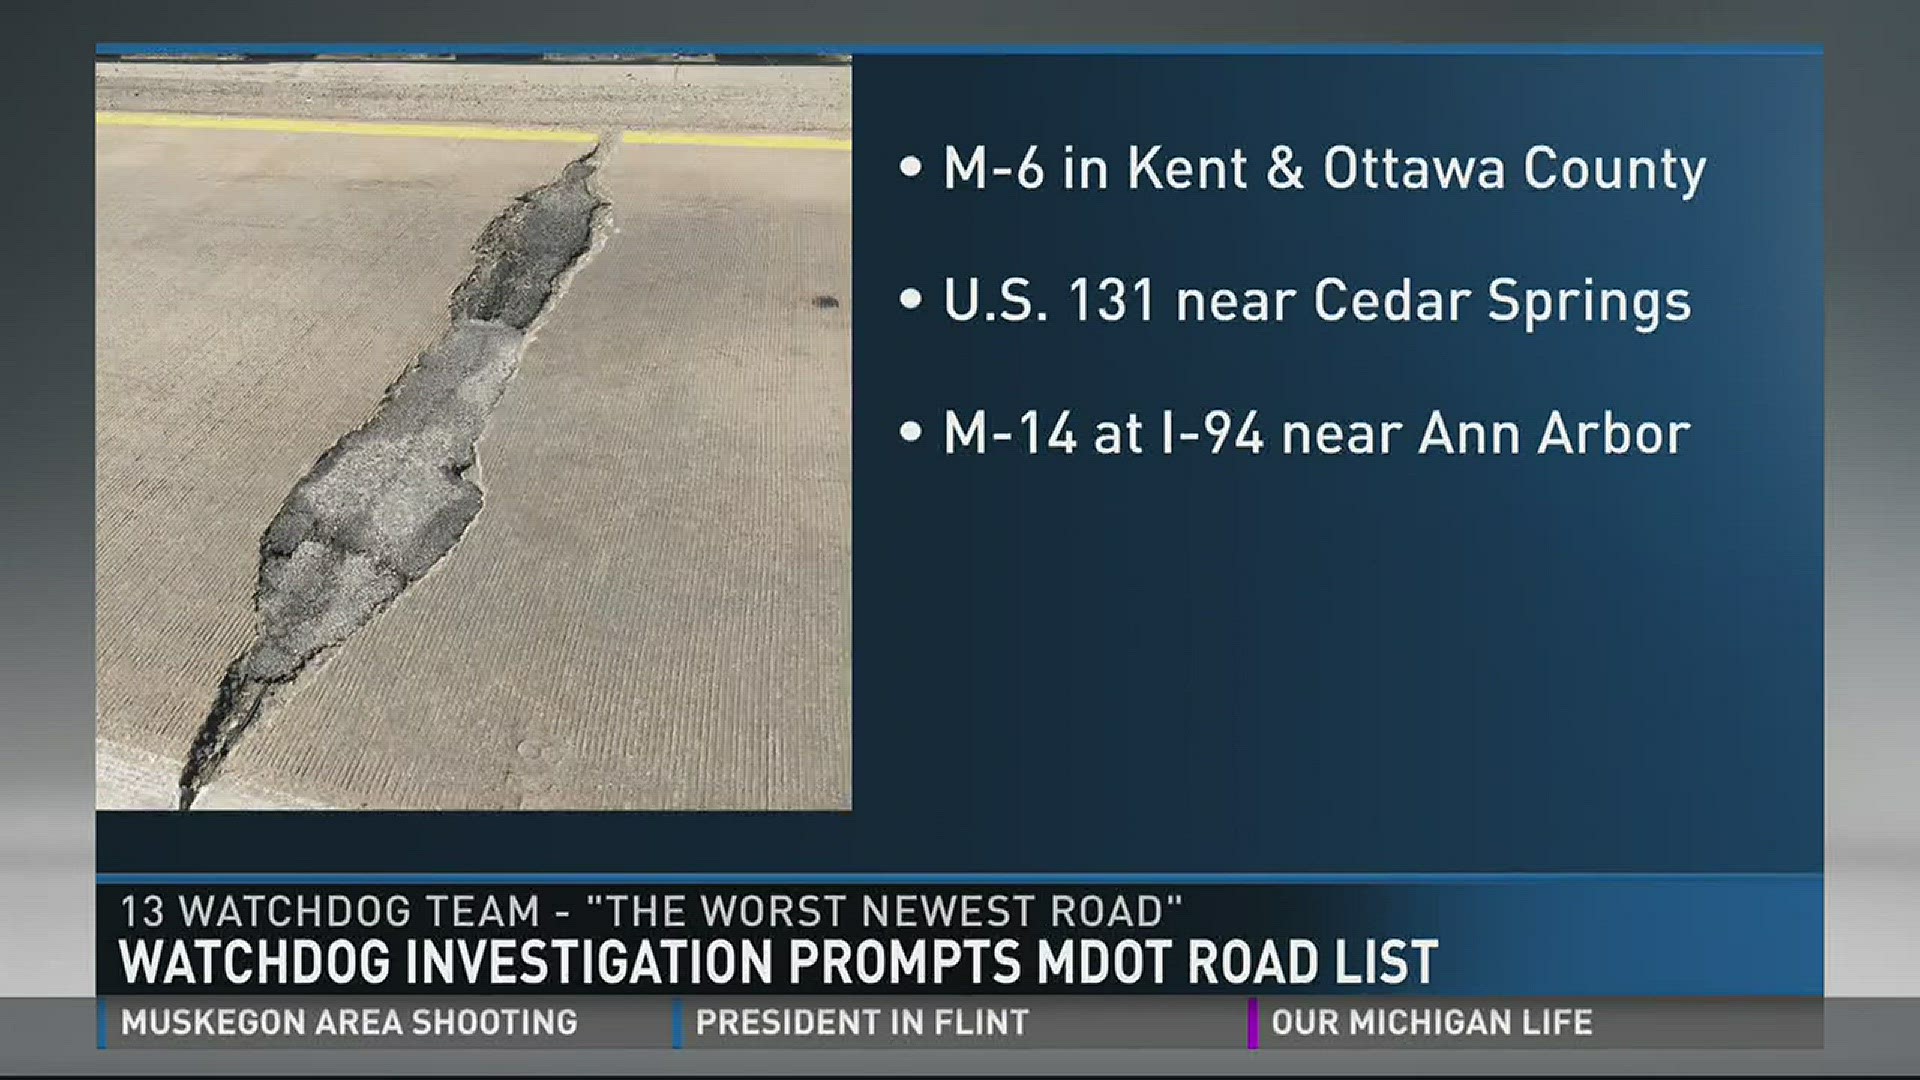 Concrete roads in Michigan are generally supposed to last 25-30 years before major rehab.